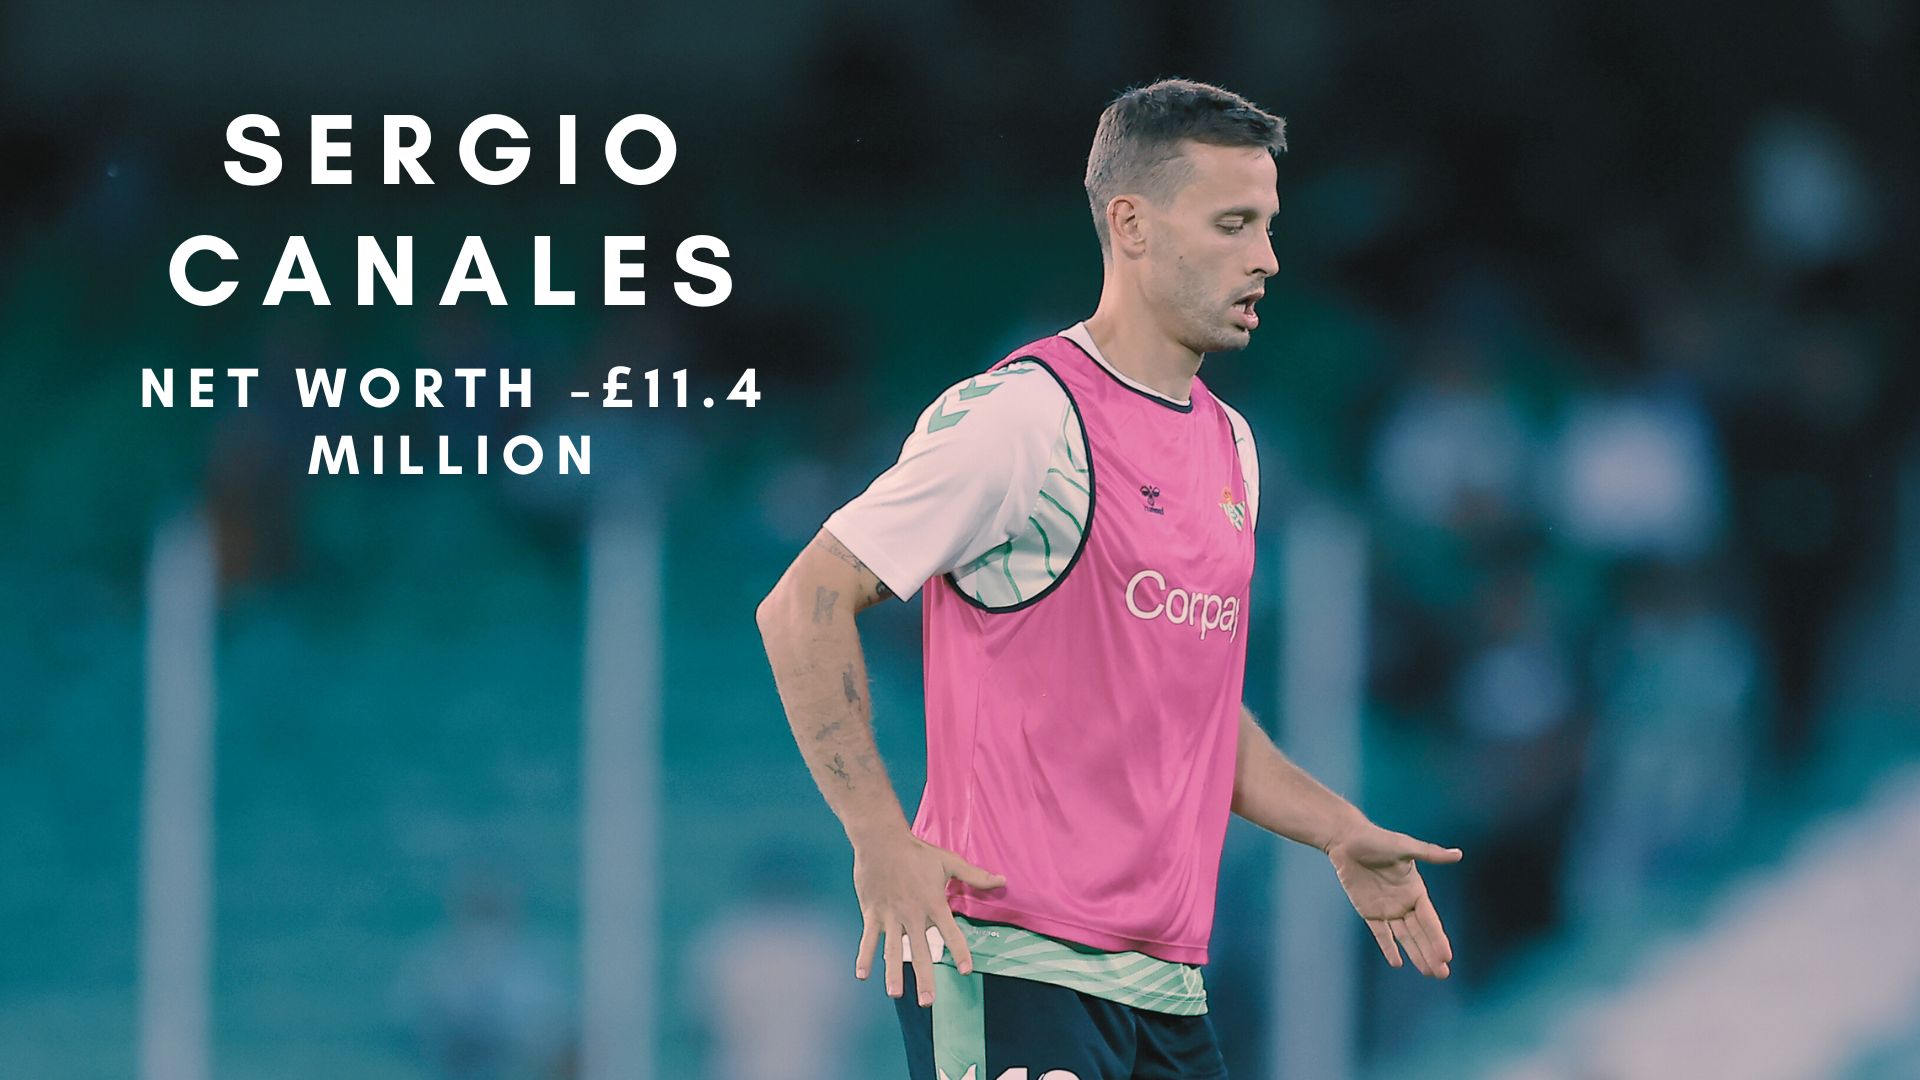 Sergio Canales net worth, salary and more.